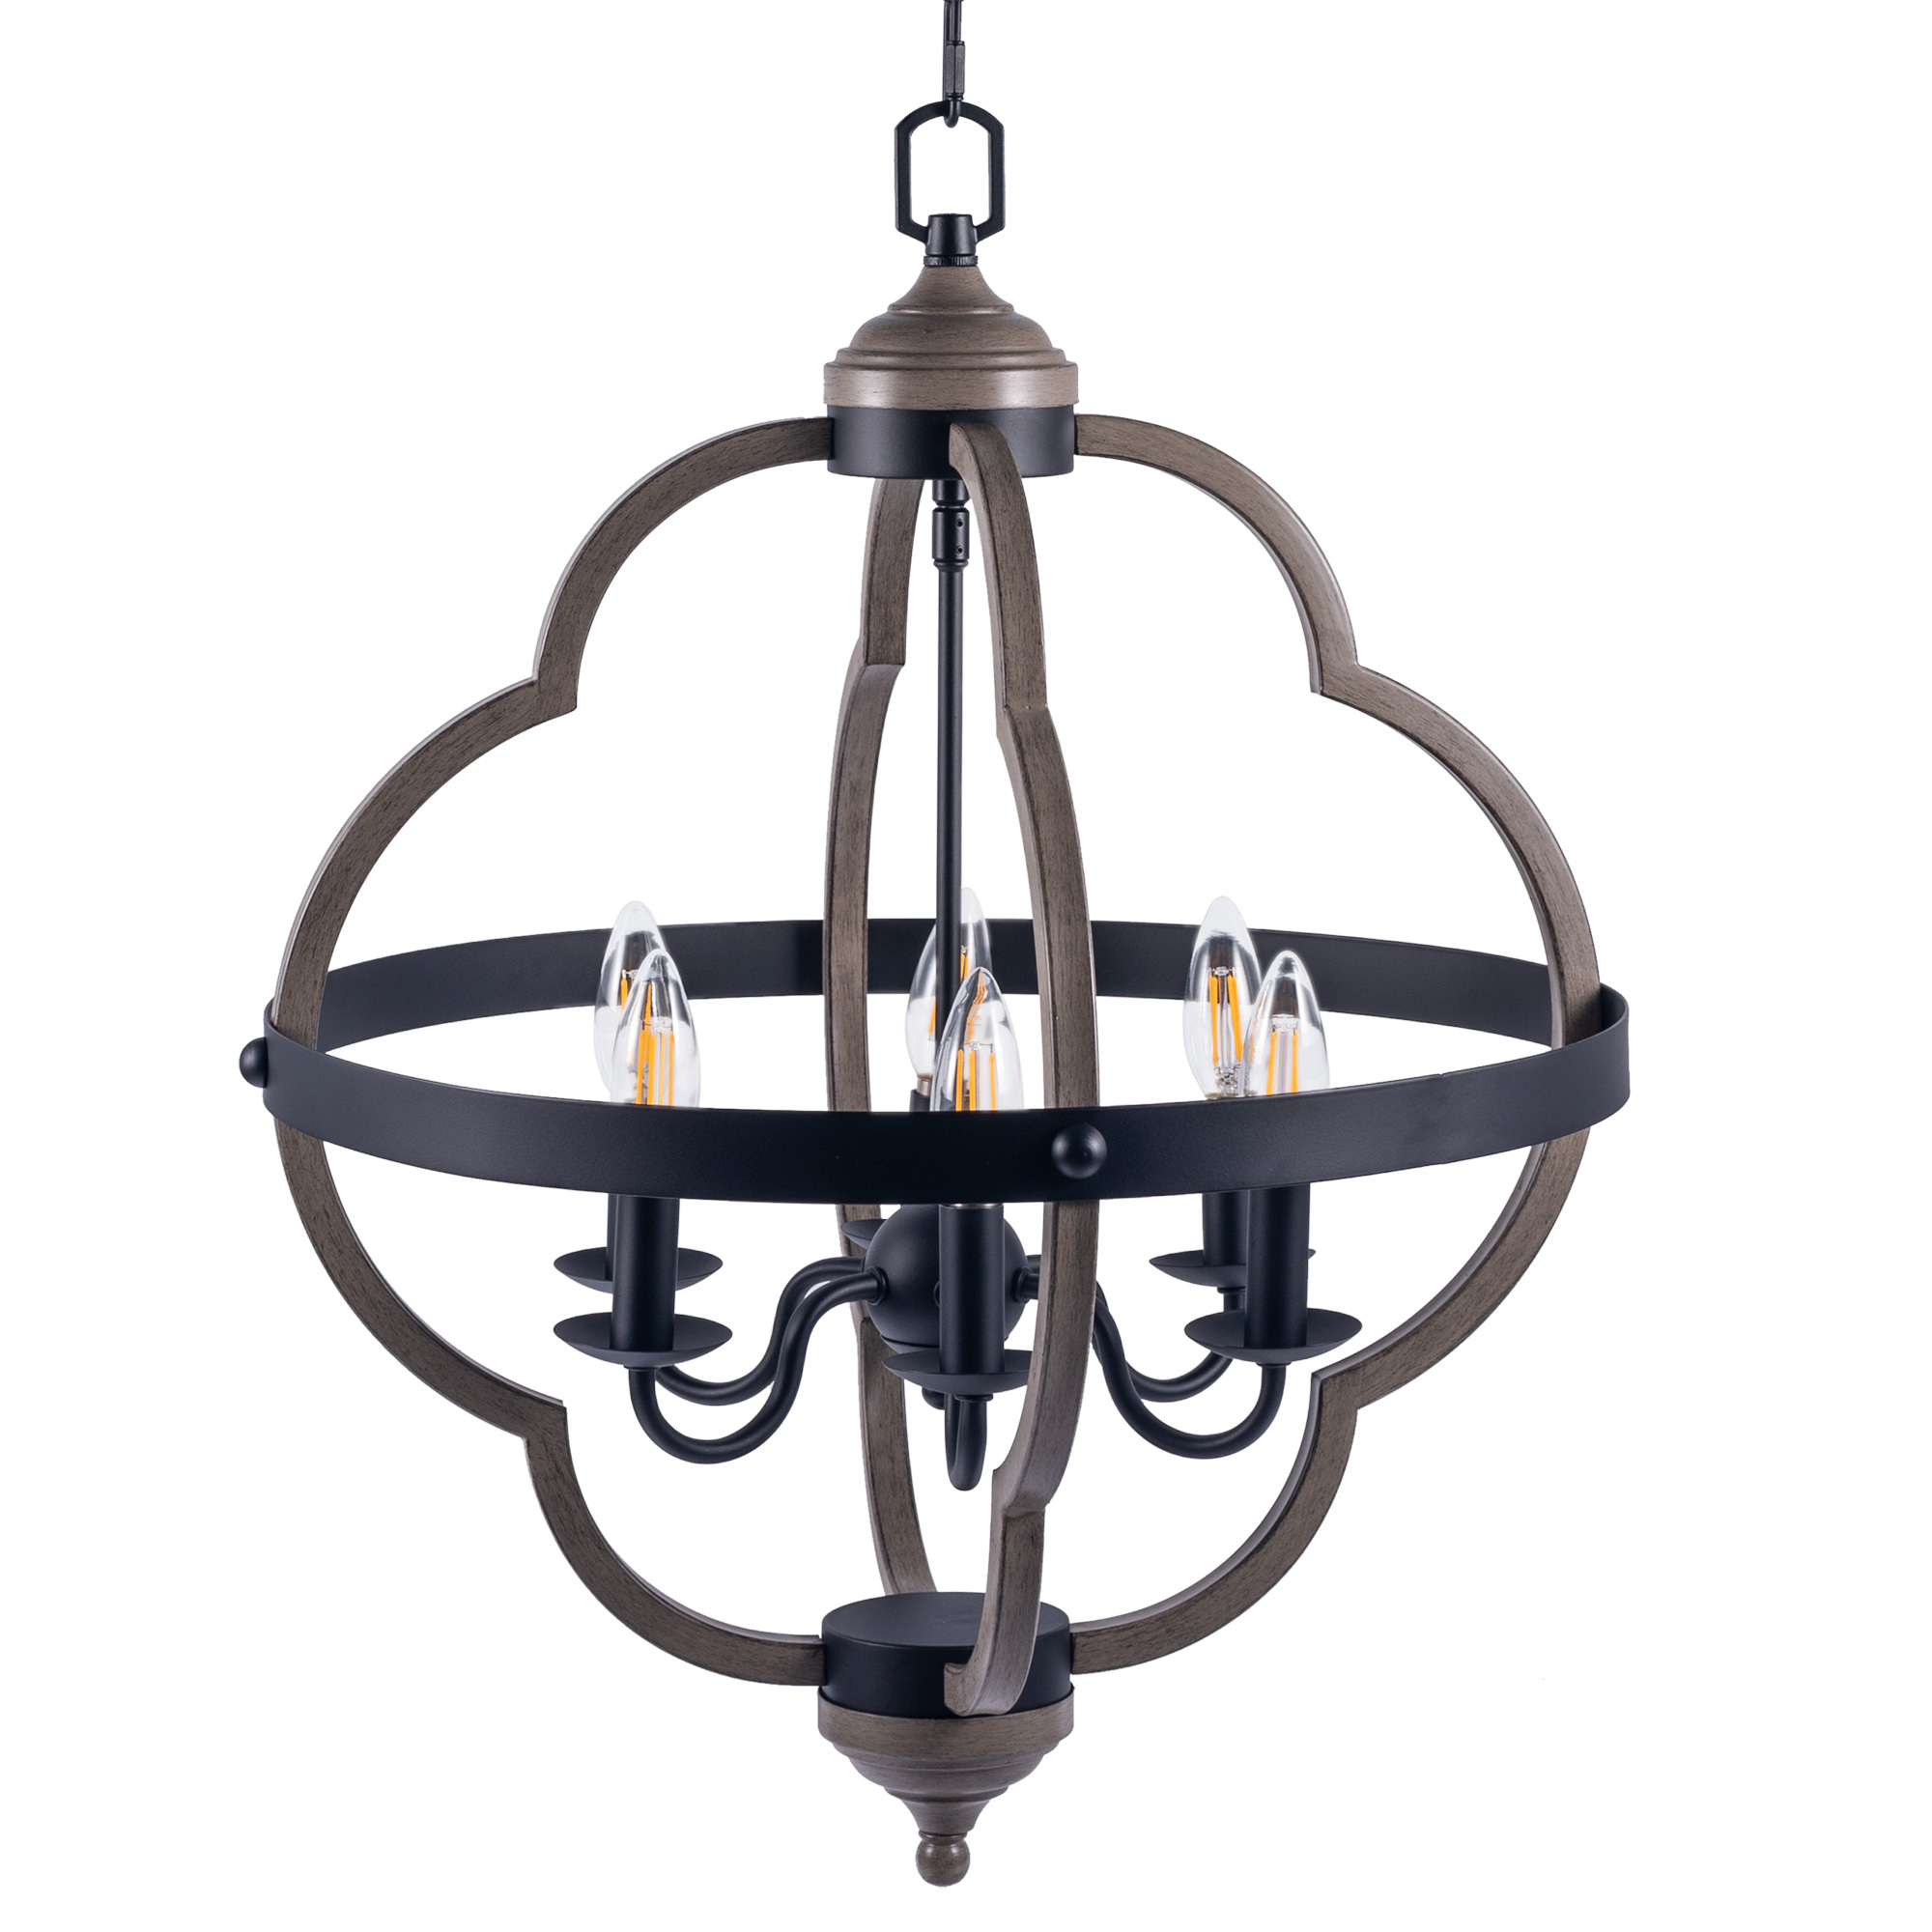 USA-Direct-6-Light-Candle-Style-Geometric-Chandelier-Industrial-Rustic-Indoor-Pendant-Light-Without--1877127-3